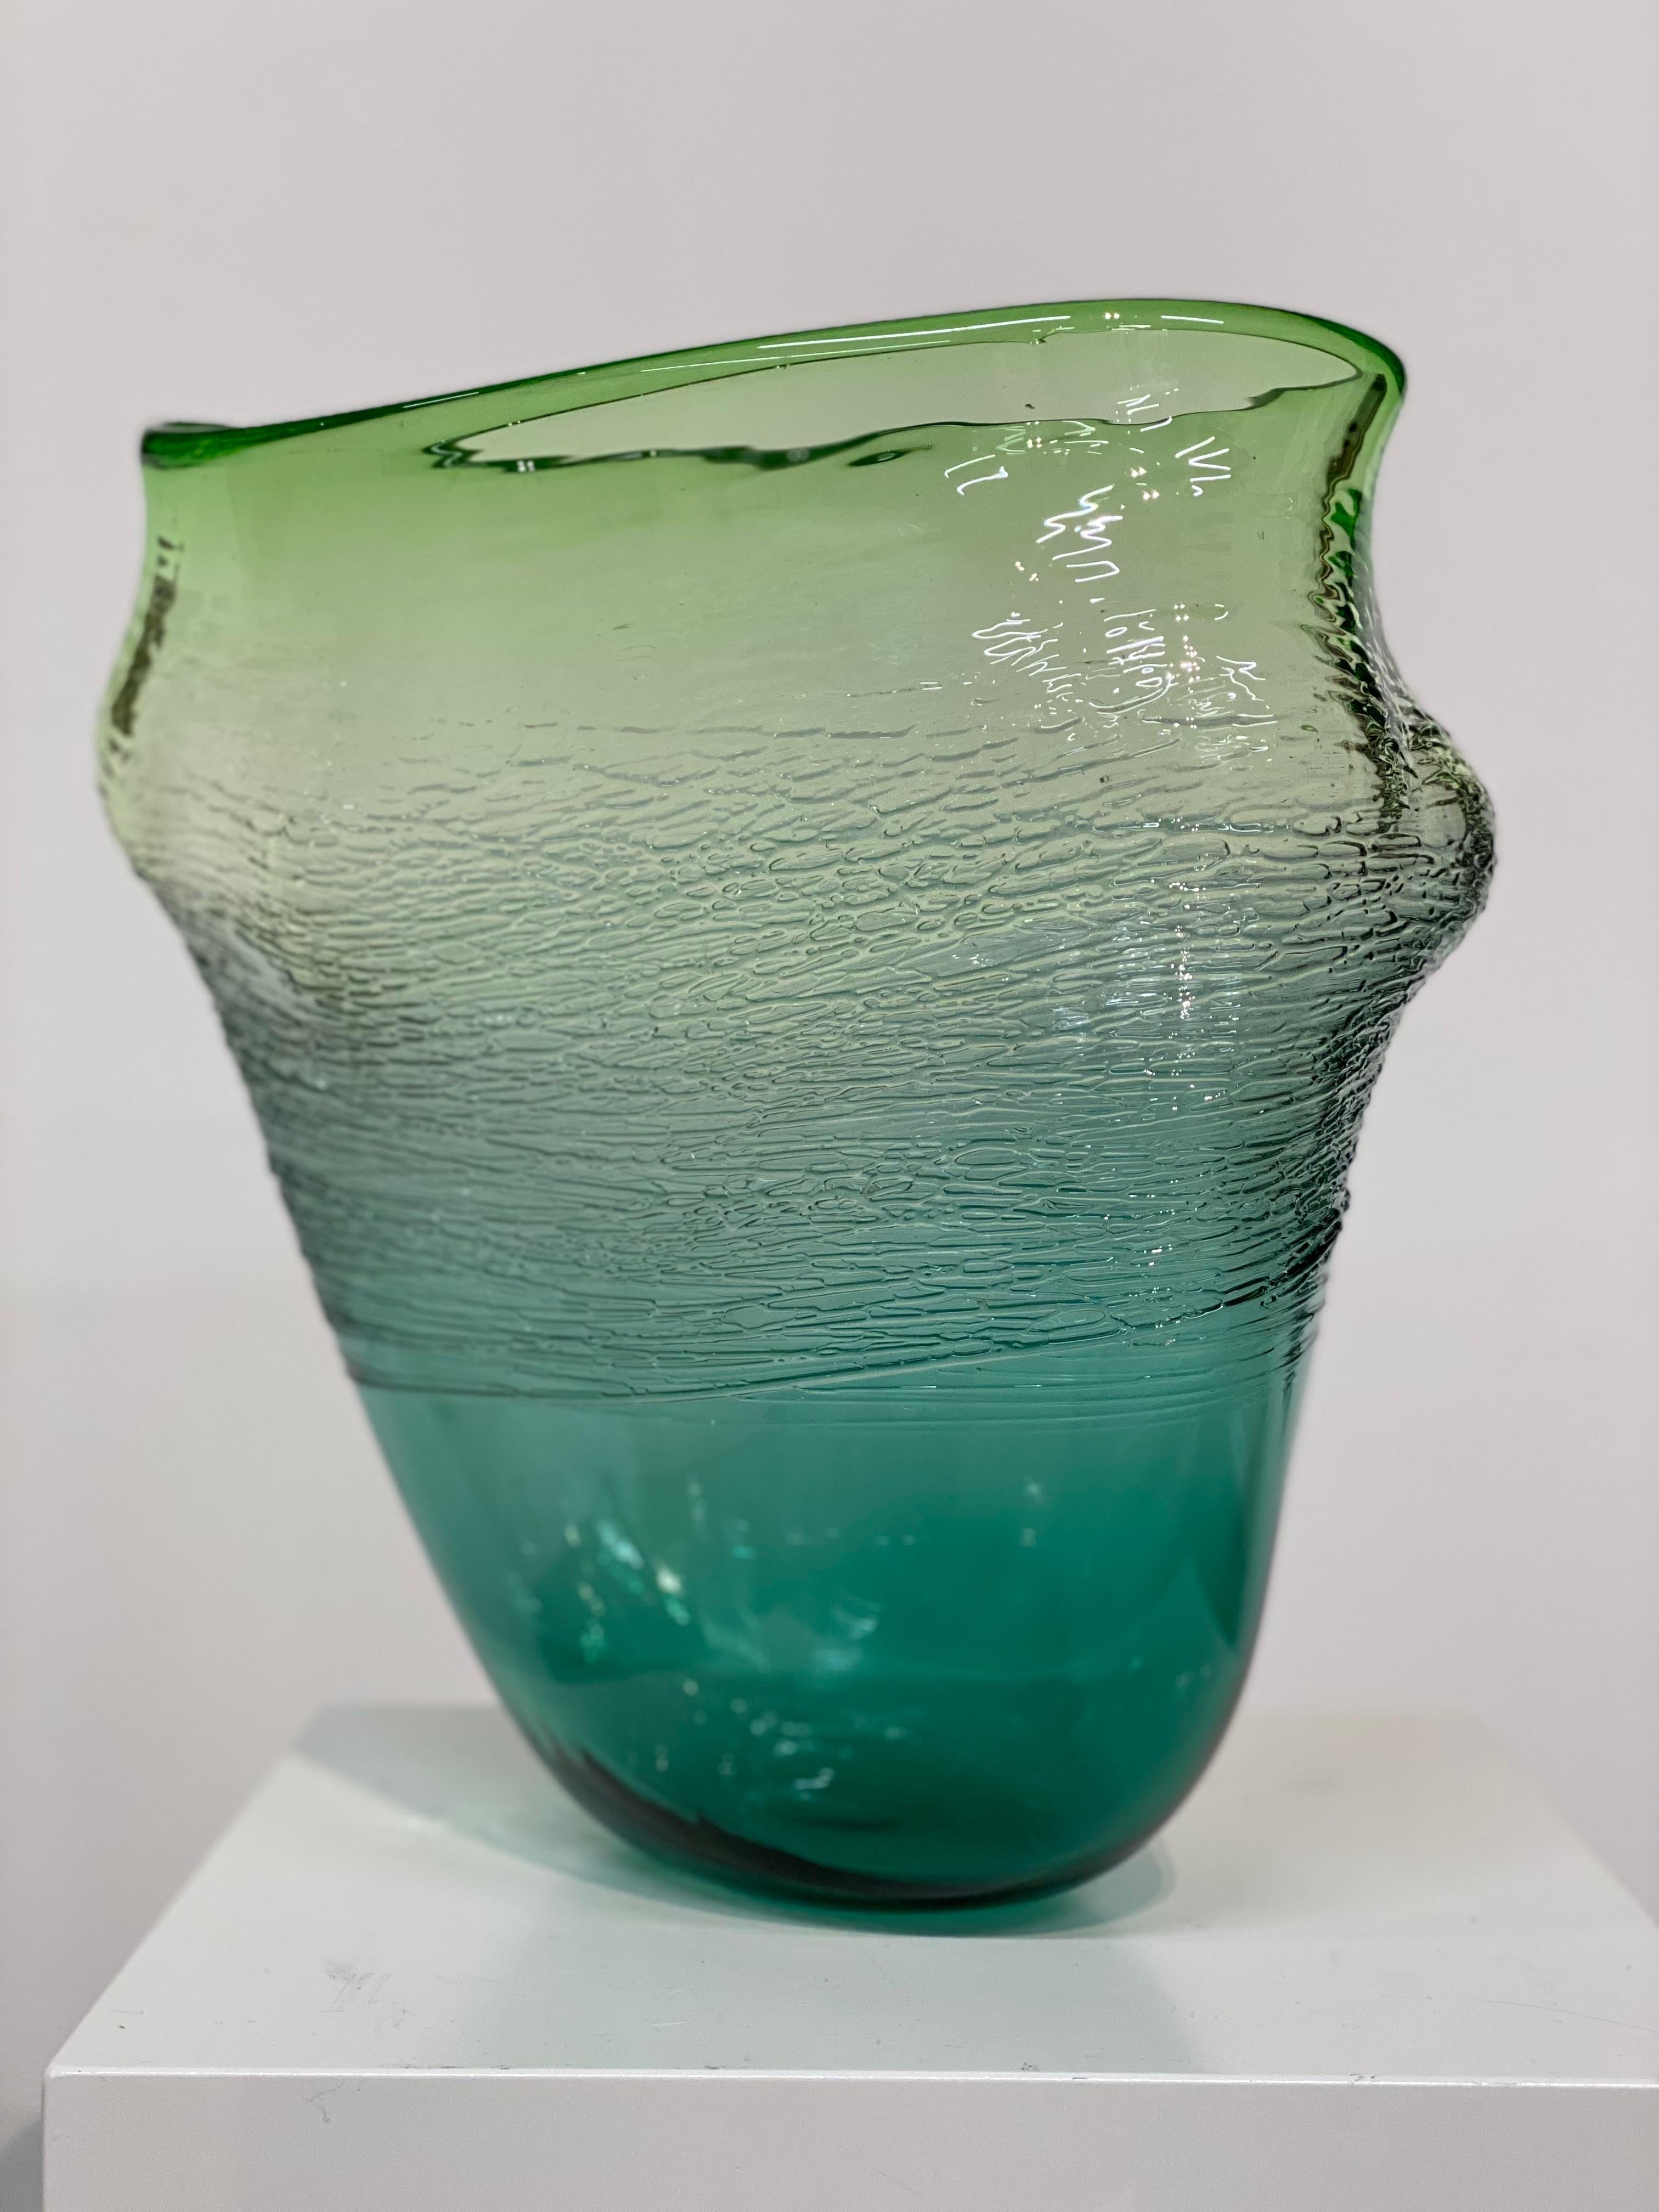 Bibi Smit
Fluid Form, green
H32cm-B25cm-D20cm 
Blown glass

Bibi Smit (b. 1965) lives and works in the Netherlands. She is a glass artist and designer. She feels the need to control all the processes, from the idea and the design to the blowing, to